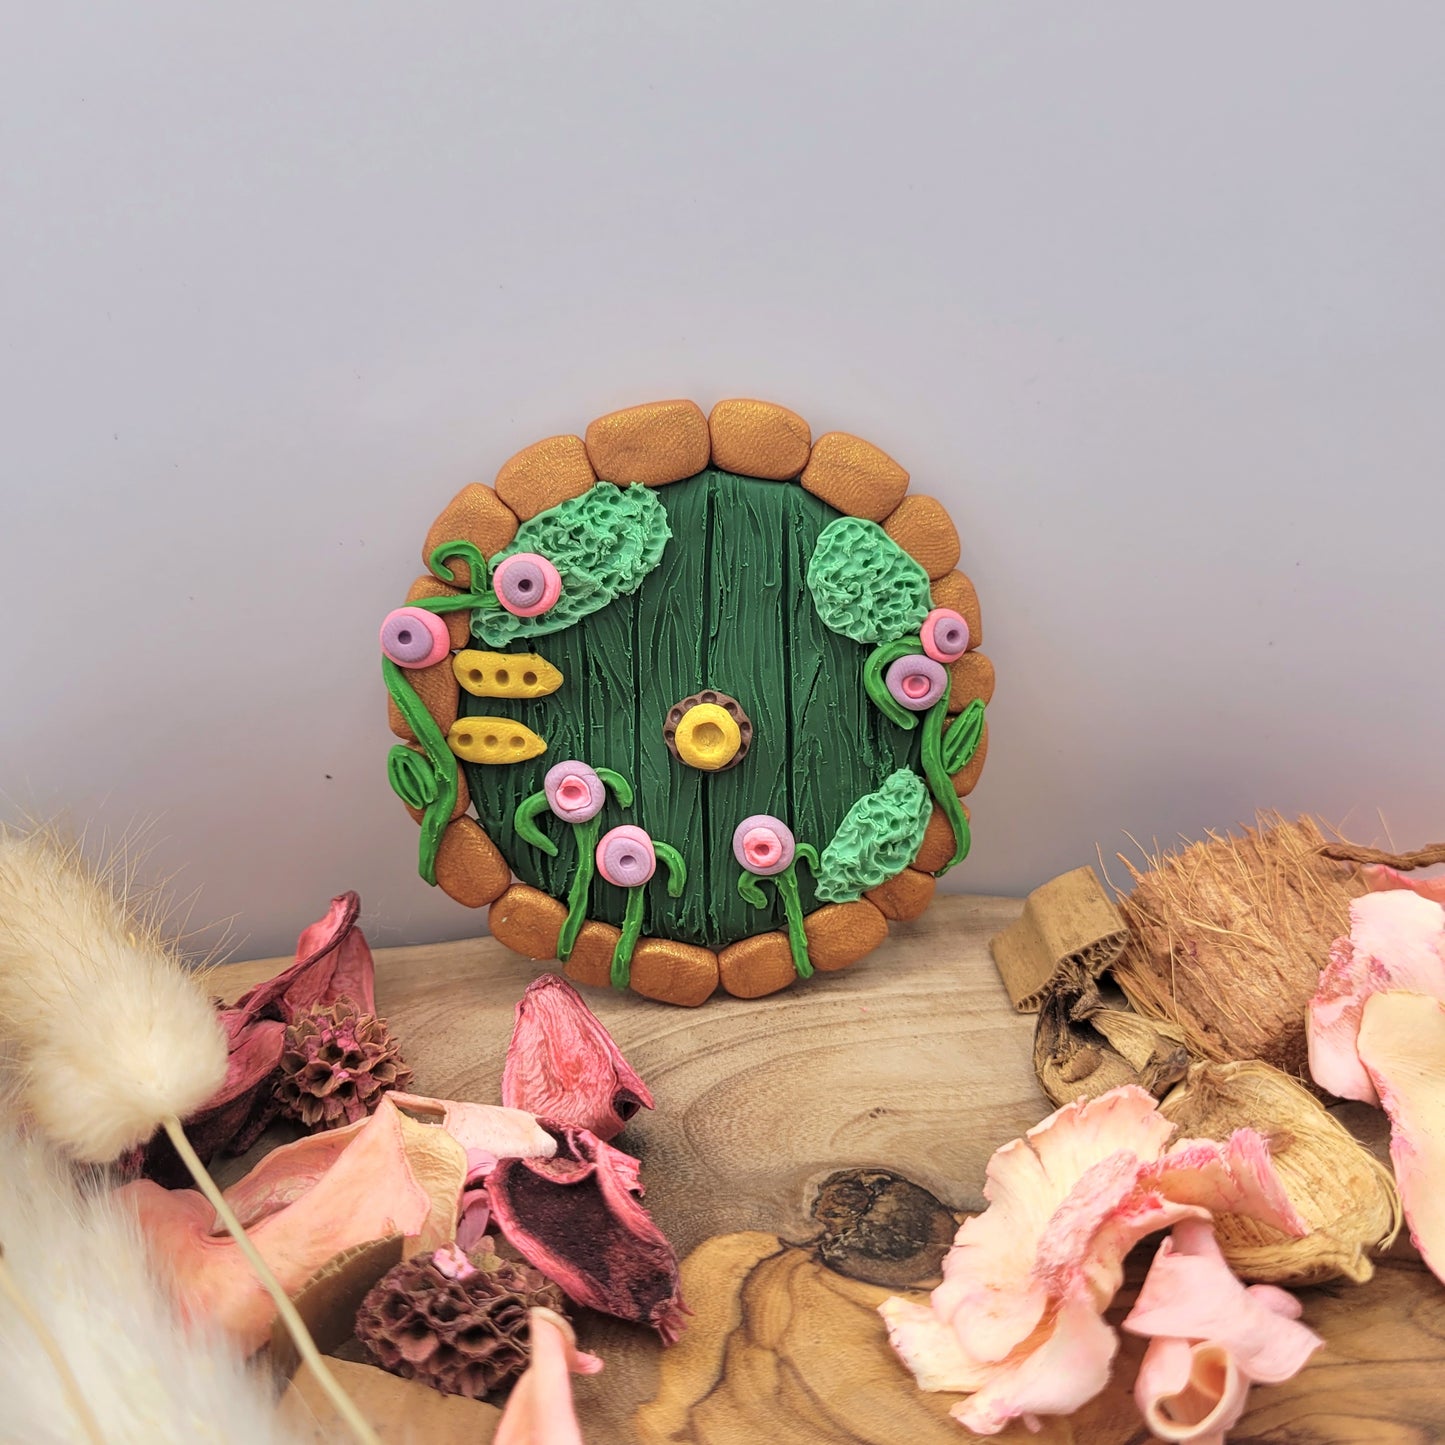 The Hobbit door rests on an oak wood platform surrounded by preserved pink flowers, wood pieces and willows. The Hobbit door is circular and green wood patterned with bronze brick finishes and golden hinges and a doorknob. It is detailed with green grass, moss and bright purple and pink flowers.